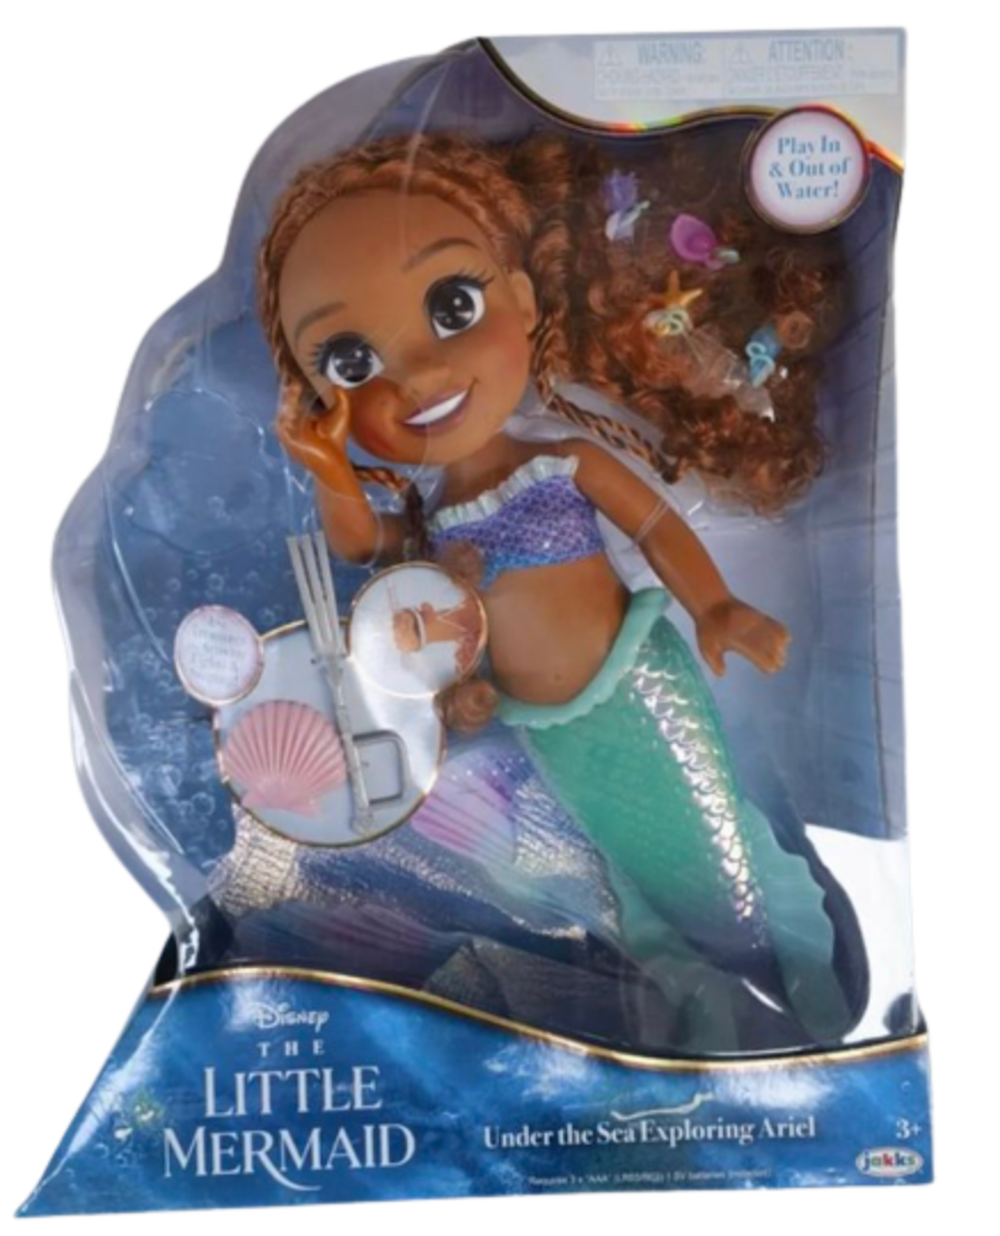 Disney The Little Mermaid Live Action Under the Sea Exploring Ariel Doll New